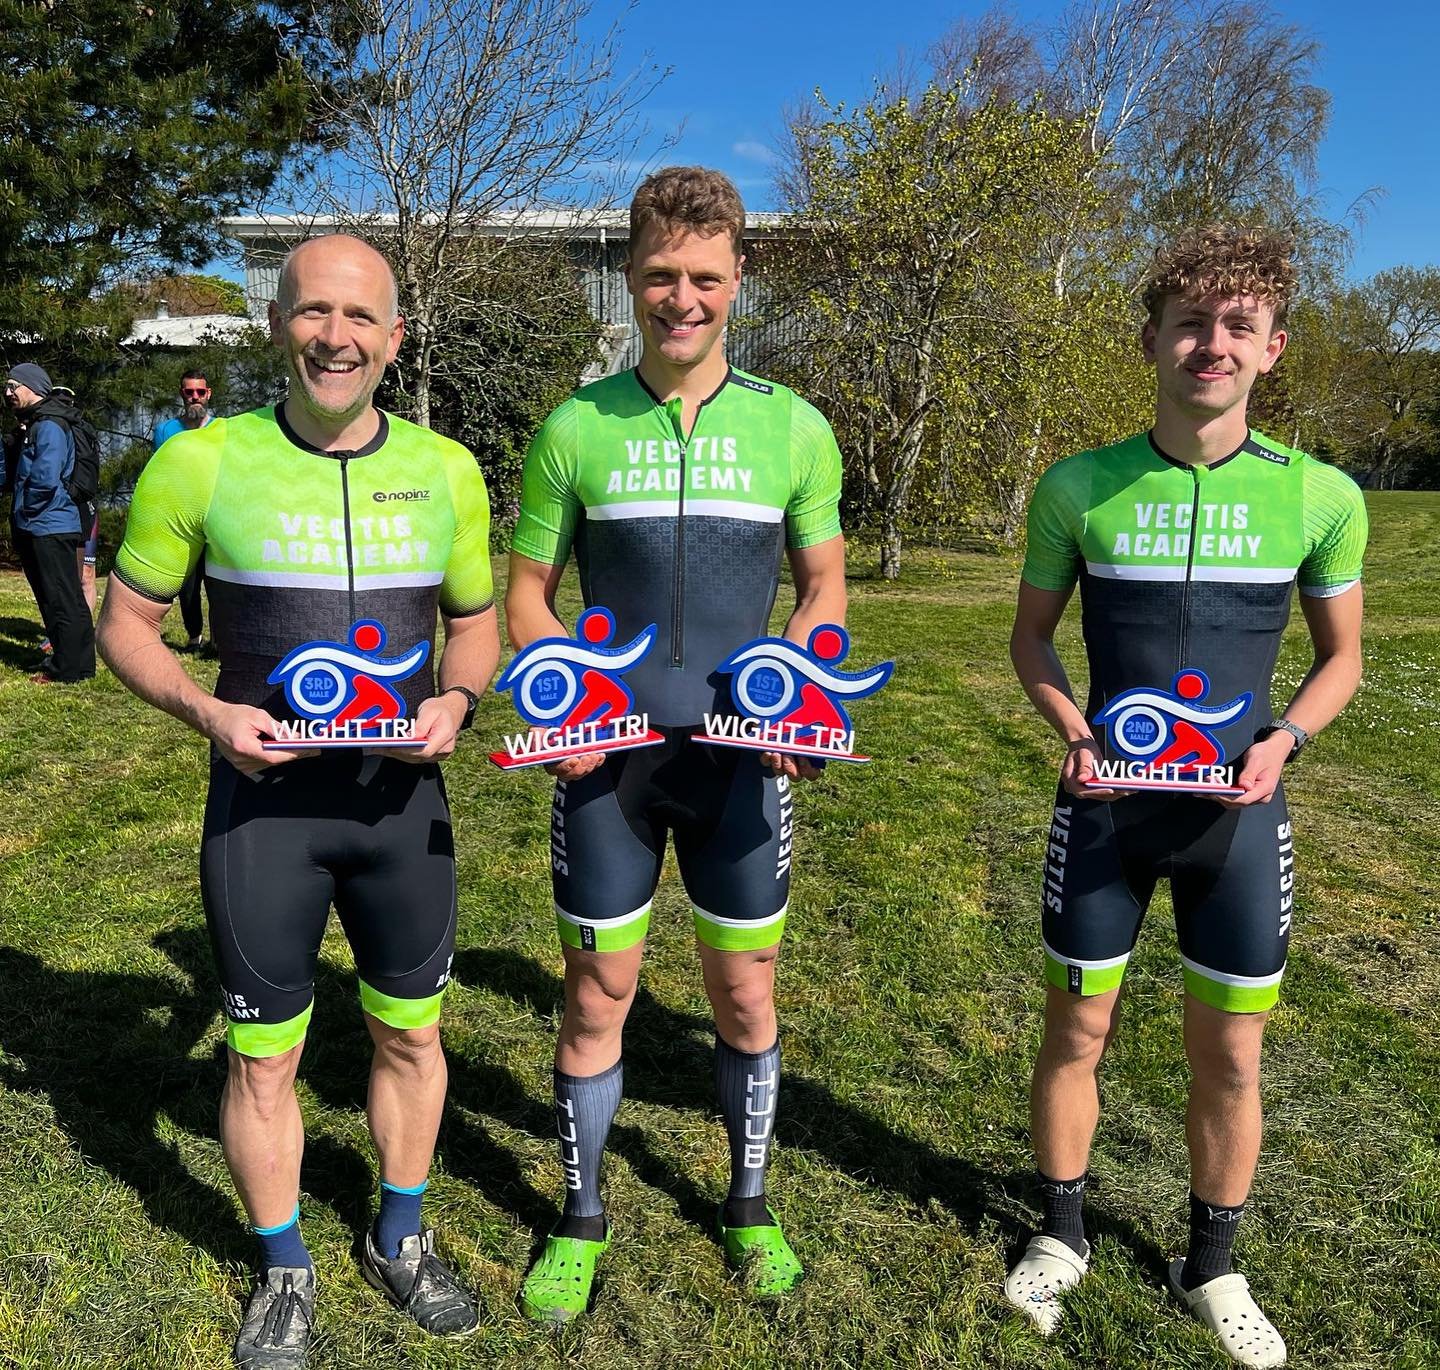 Spring success! 🥇🥈🥉

Vectis Academy athletes took on the  @wight_tri spring triathlon - participants completed a pool swim, hilly bike and 5k run and were met with sunny but chilly conditions. These proved favourable though, and winter training sh